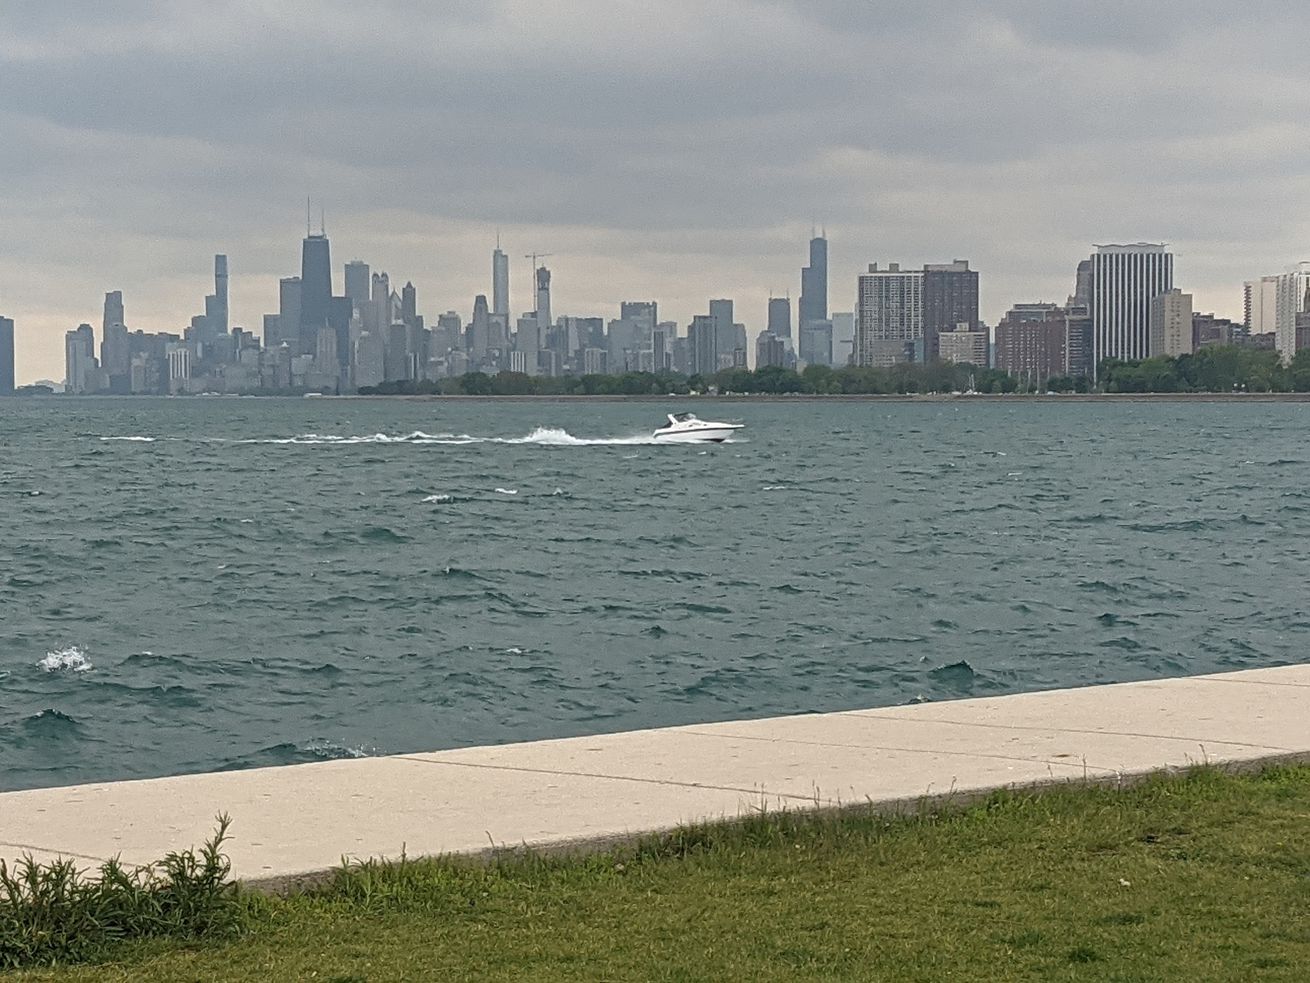 A boat speeds back toward Montrose Harbor in the middle of the best view of downtown Chicago from the south side of Montrose, the day before parking meters turned on at Montrose Harbor Drive. Credit: Dale Bowman